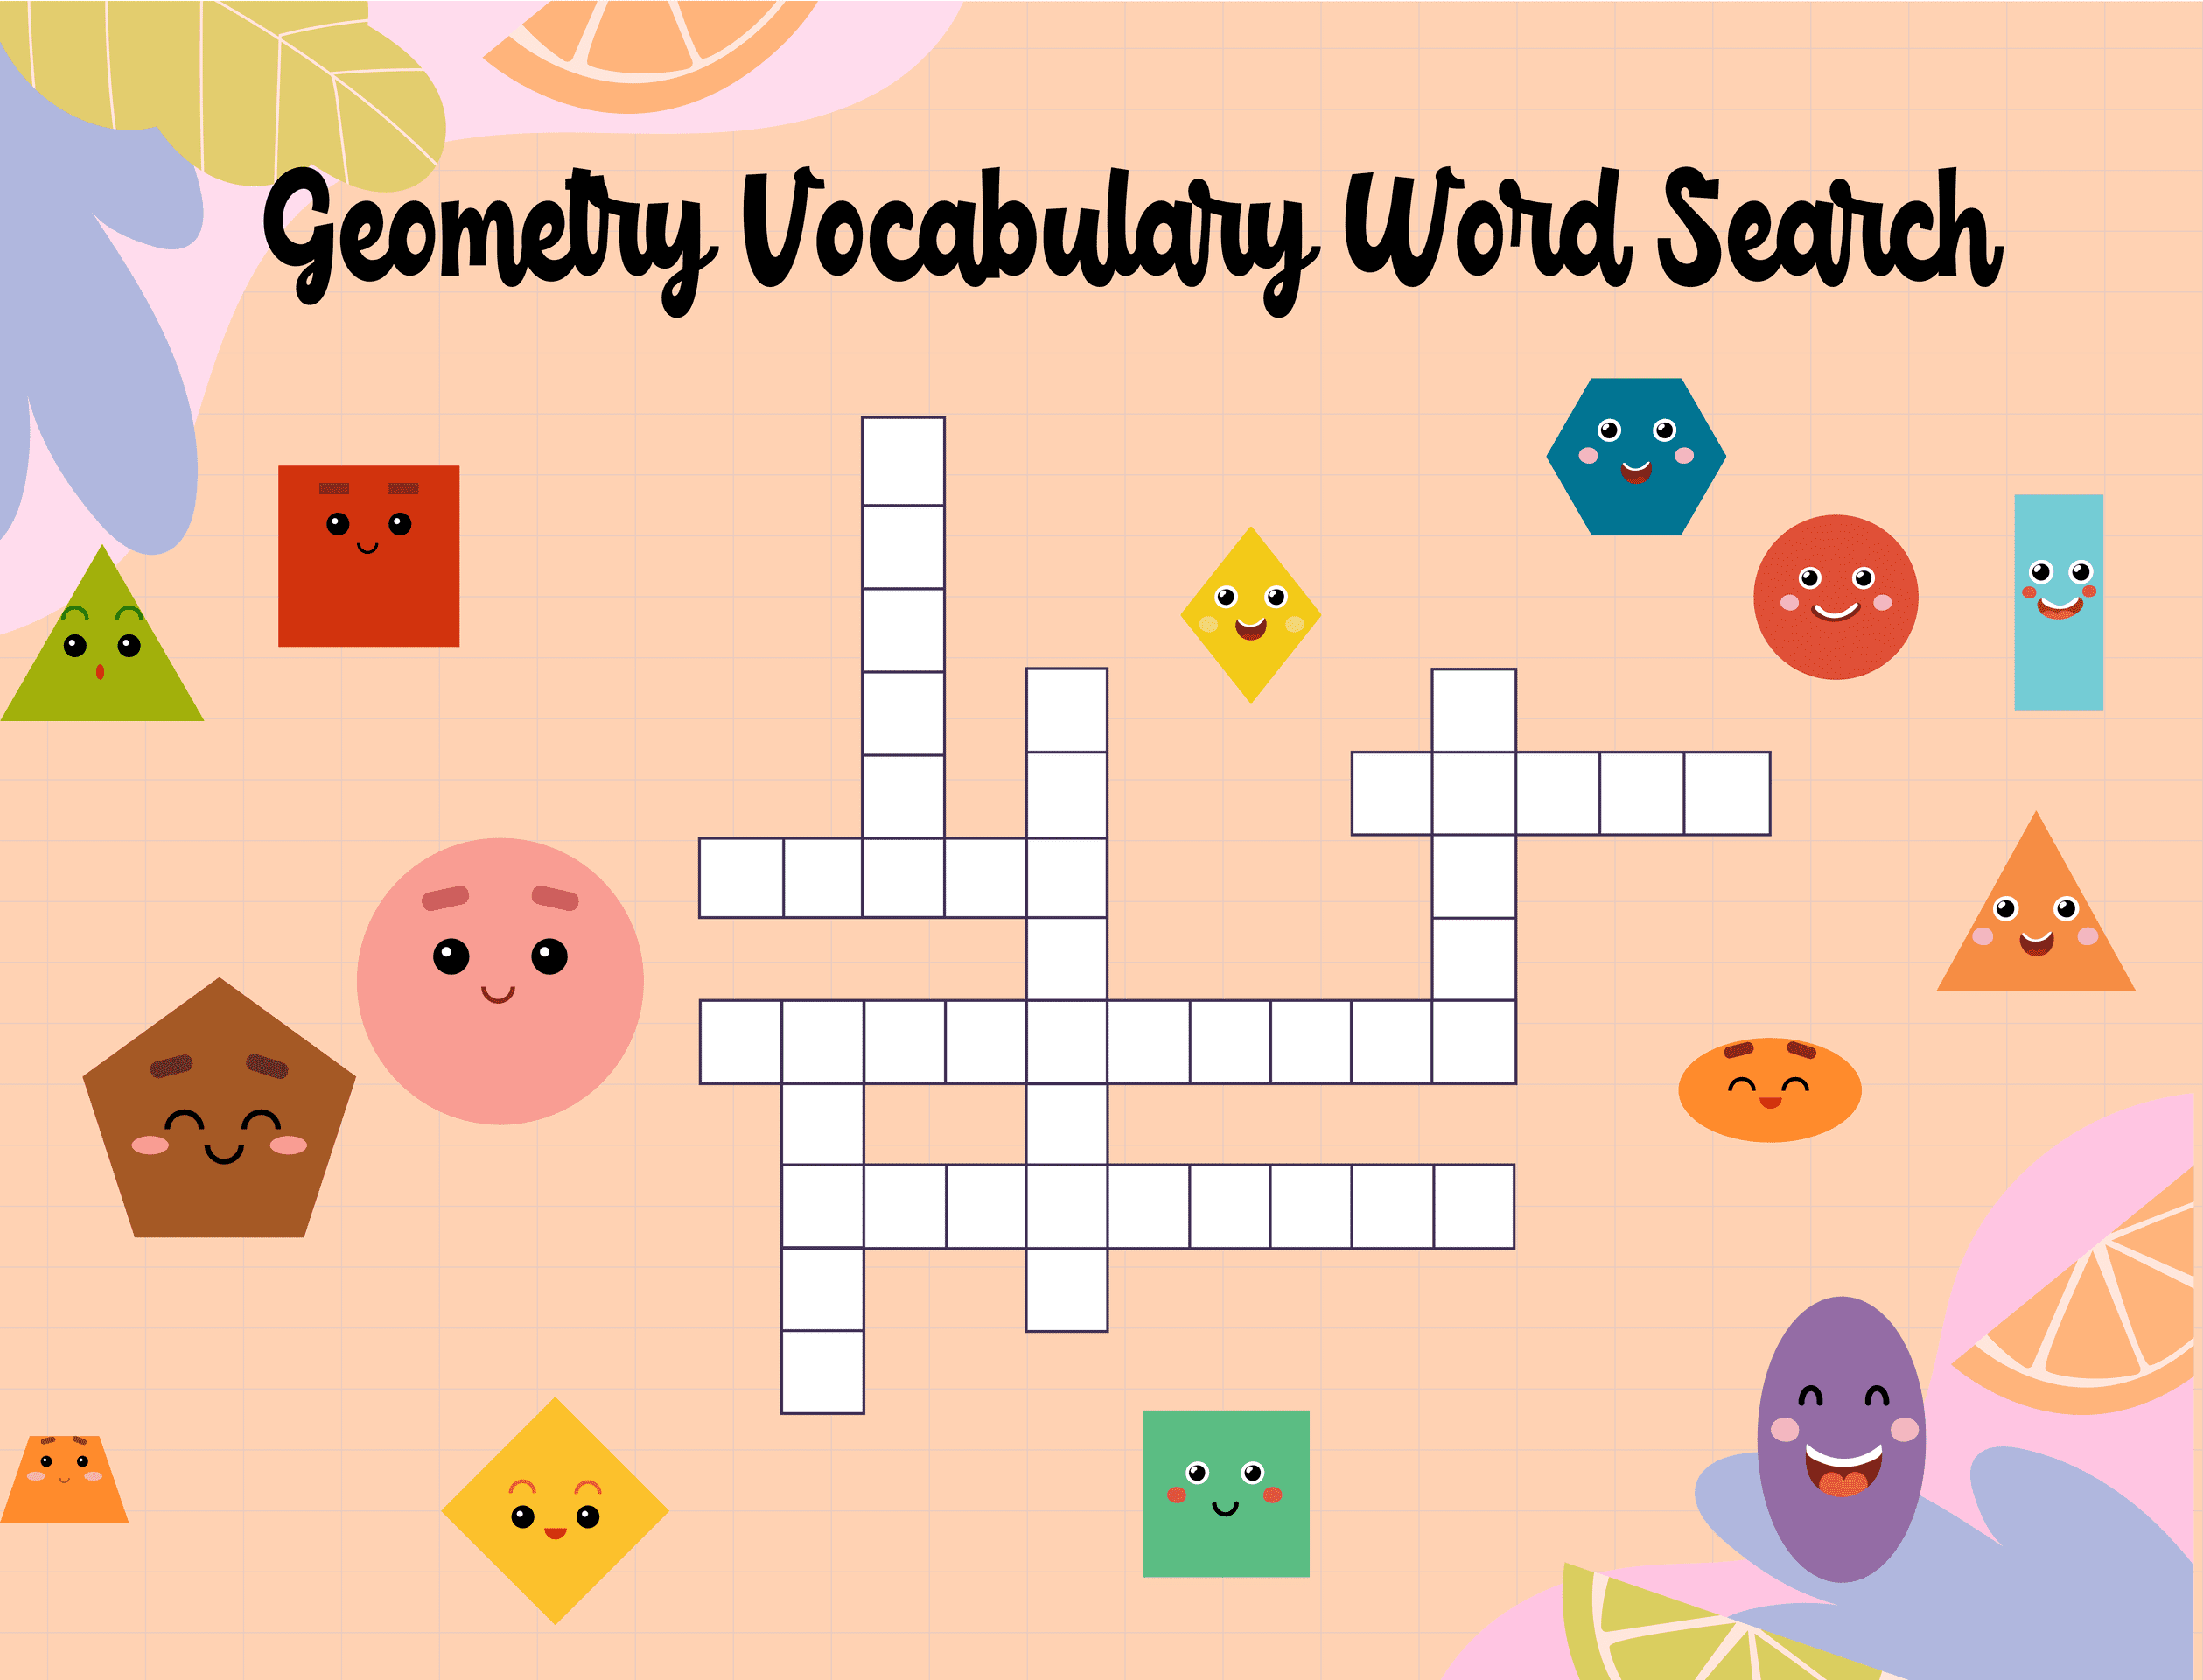 using puzzle to describe Geometry Vocabulary Word Search Puzzle